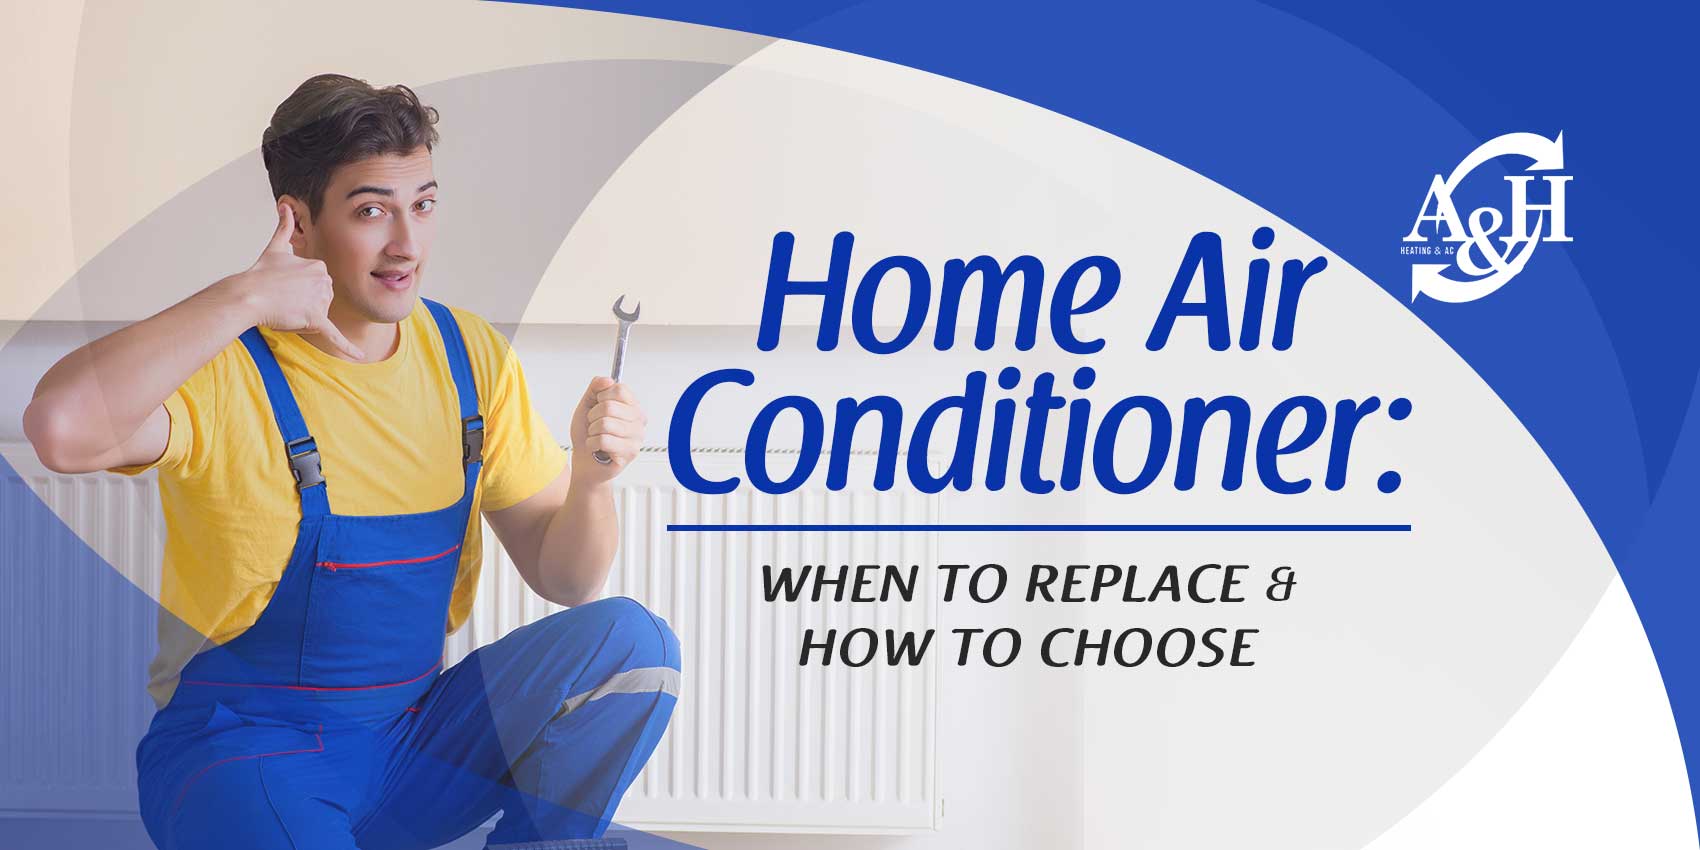 Home Air Conditioner: When to Replace & How to Choose